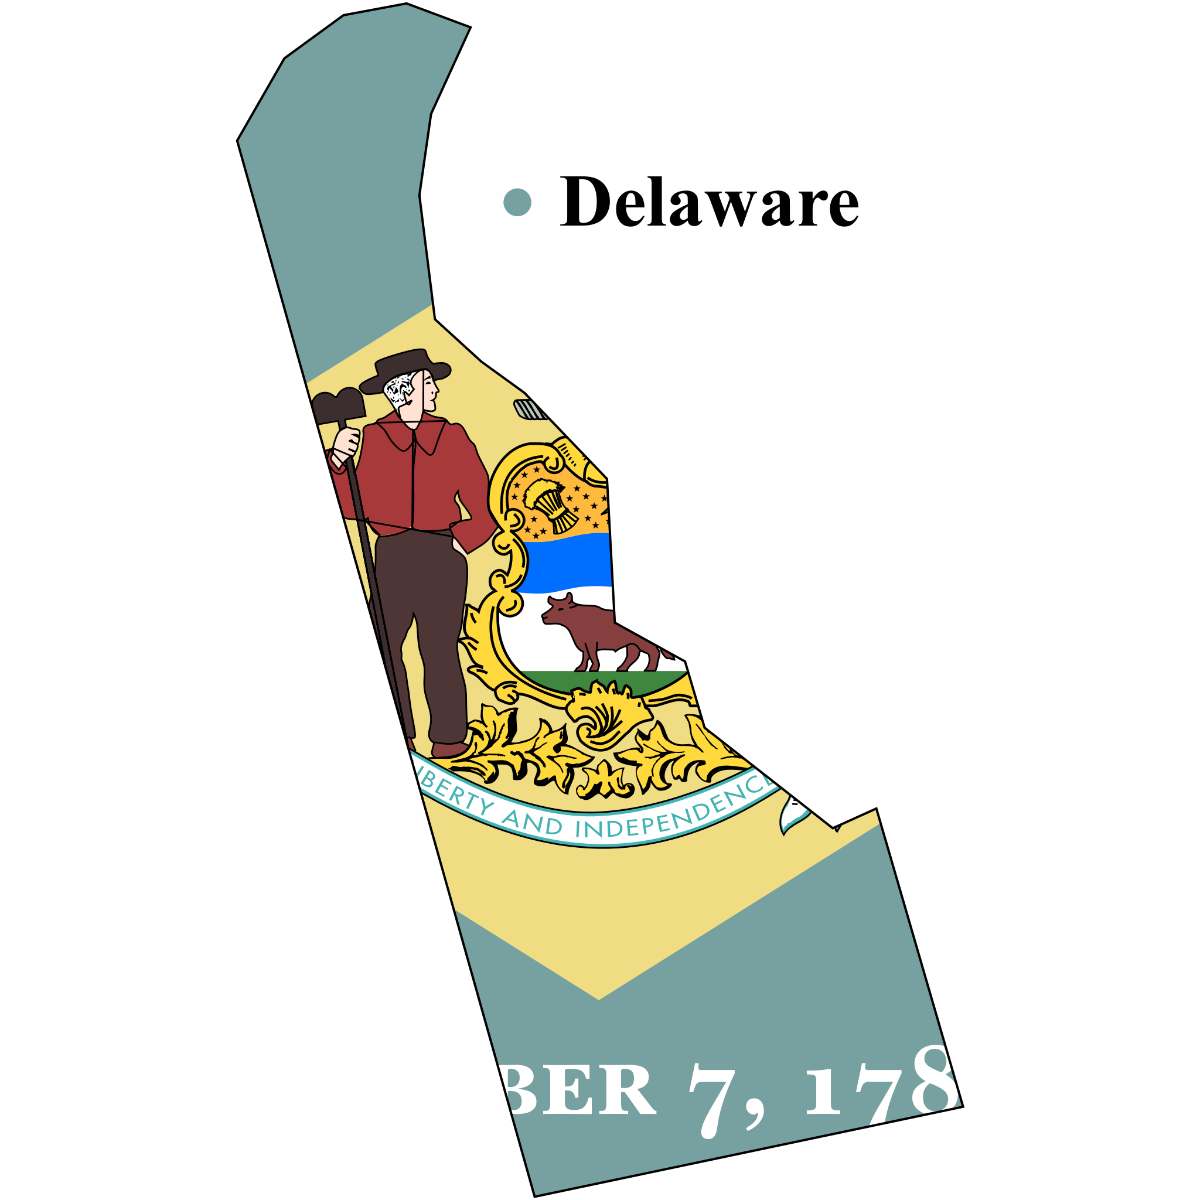 Delaware State map cutout with Delaware flag superimposed